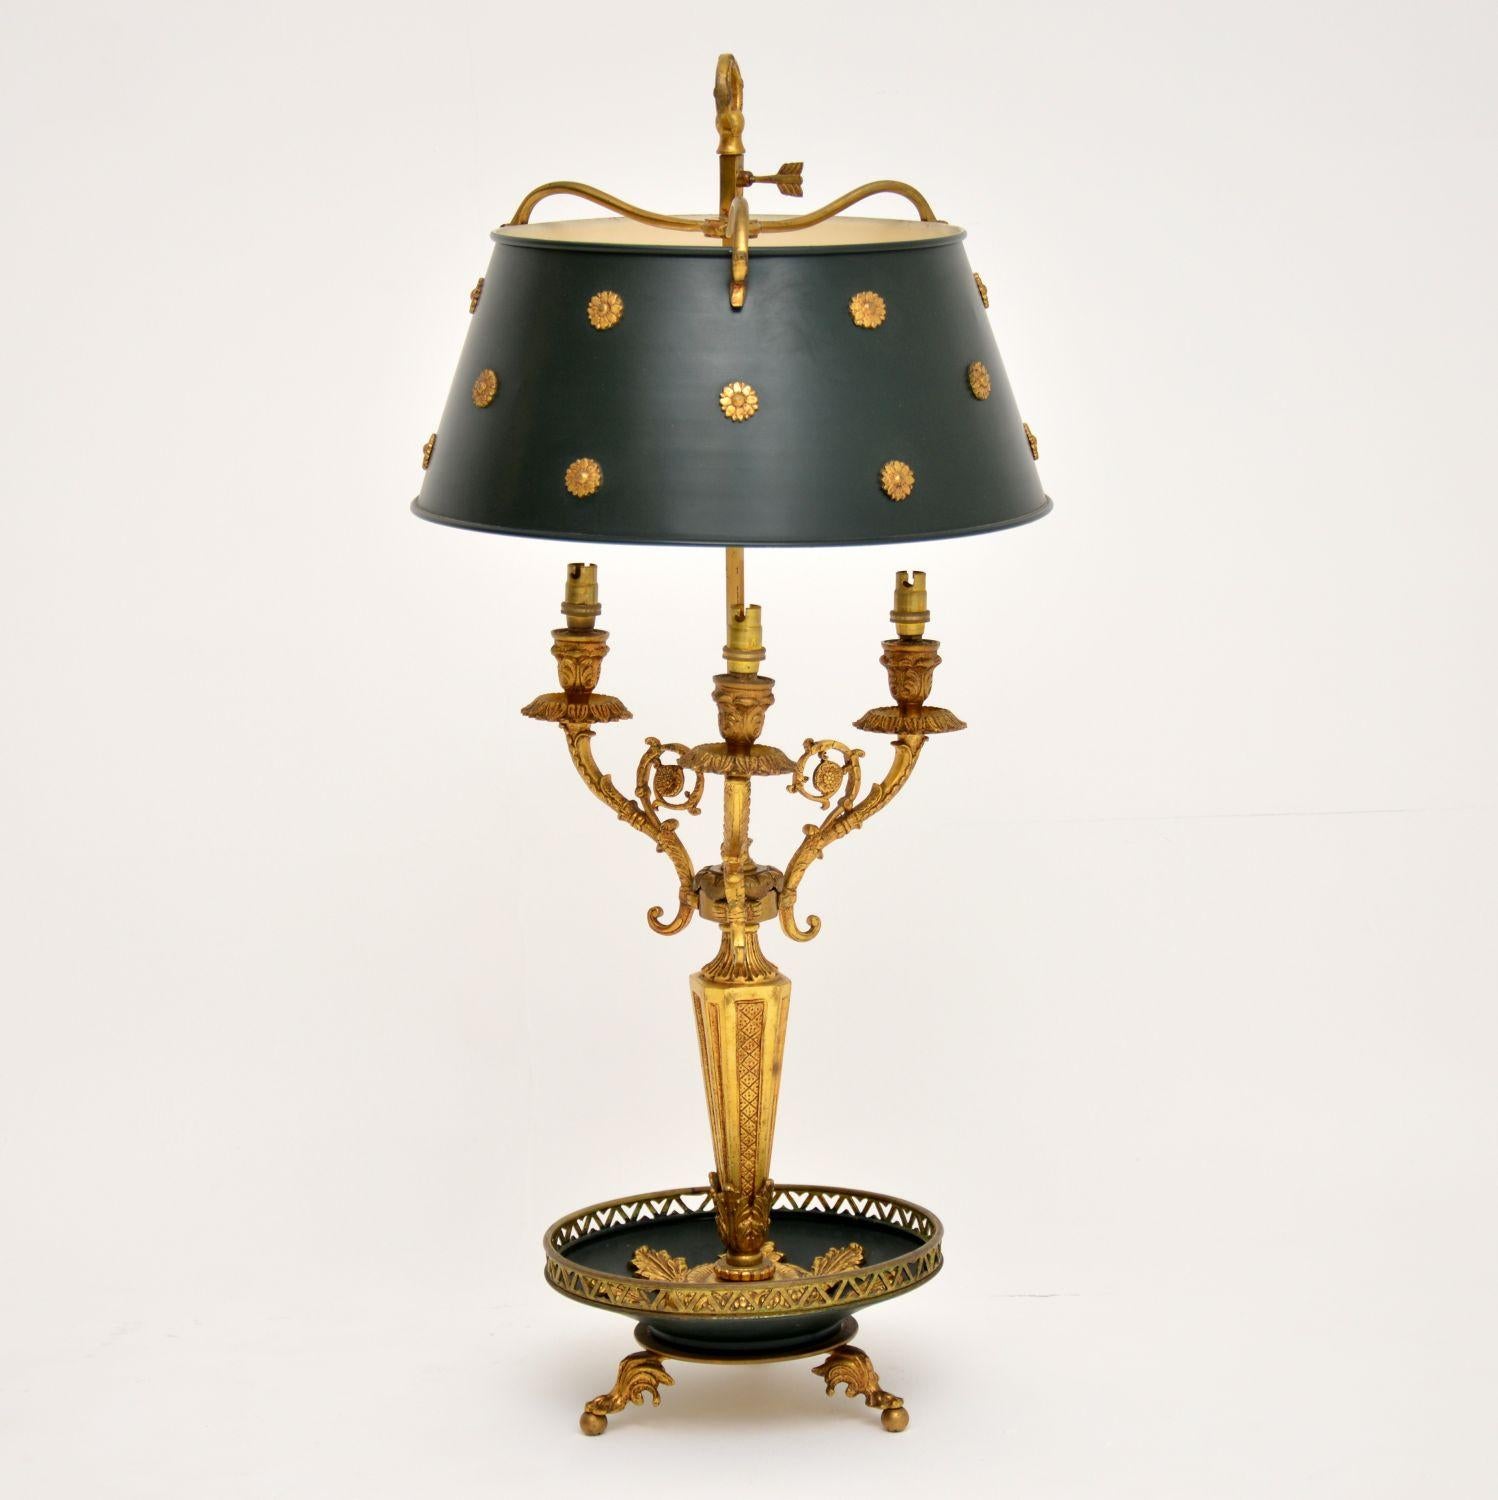 Large antique neoclassical French gilt metal brass and tole table lamp in excellent original condition. It’s a very impressive lamp with some fine details and I would date it to circa 1910s-1920s period. Please check out and enlarge all the images,